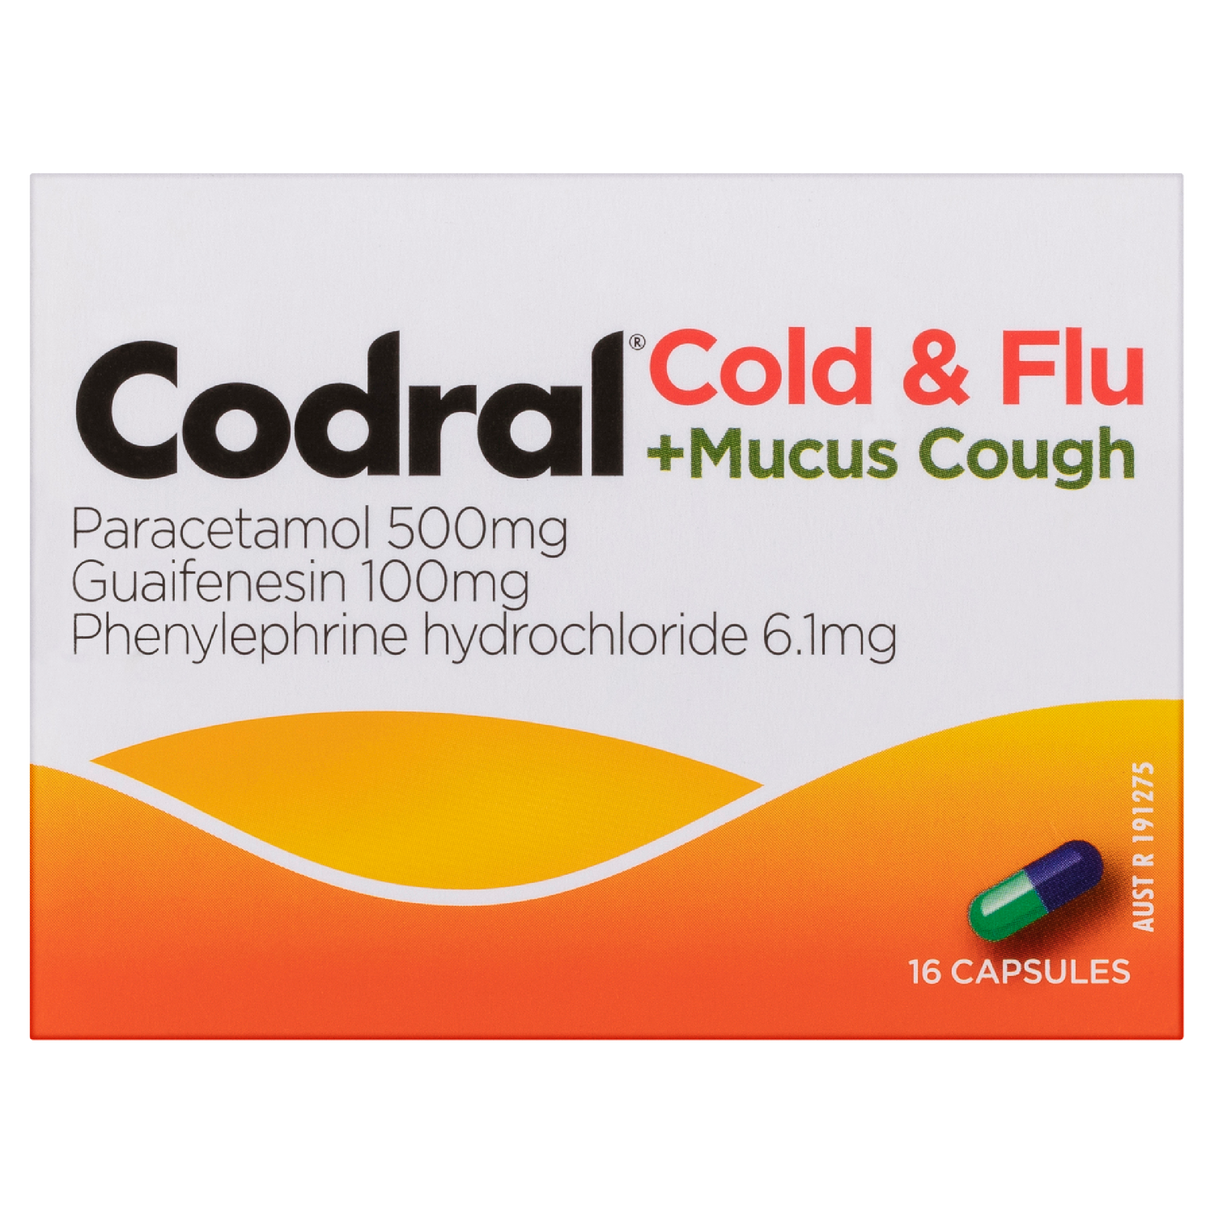 Codral Cold & Flu + Mucus Cough 16 Pack